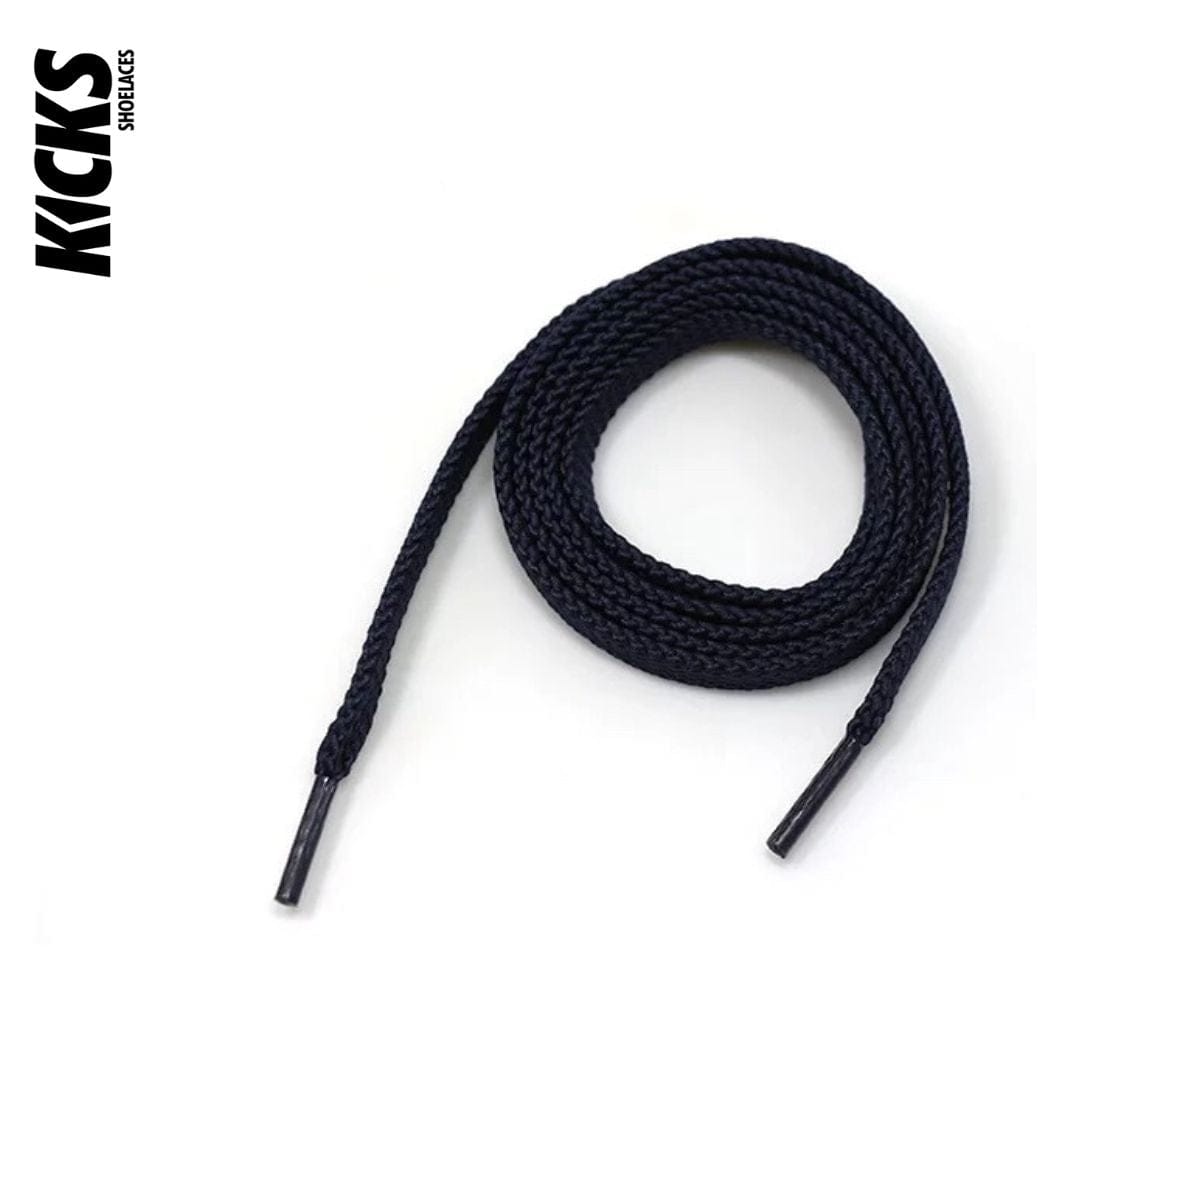 Dark Blue Replacement New Balance Laces for New Balance Shoes by Kicks Shoelaces